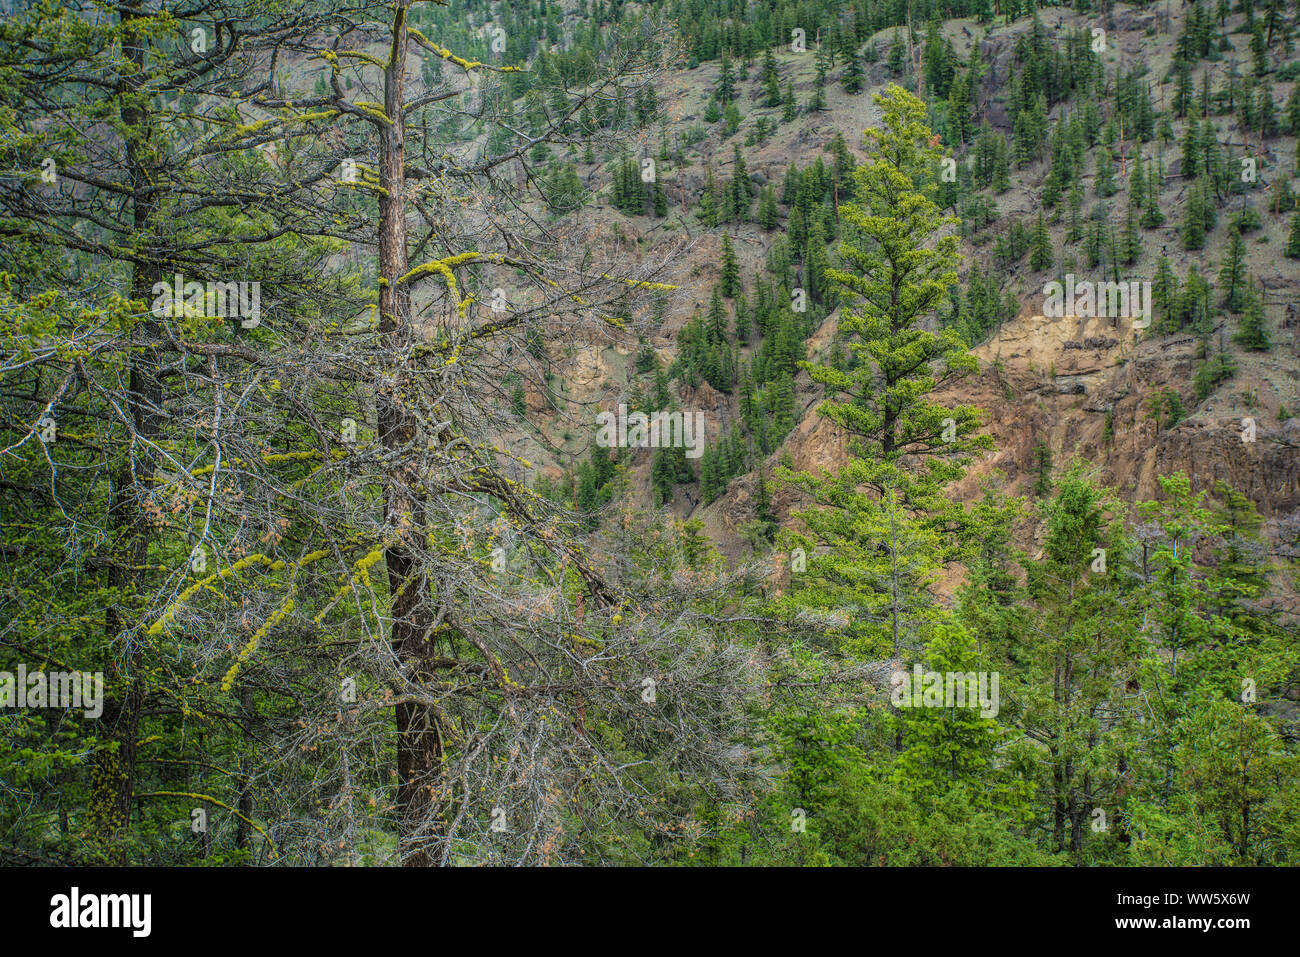 Scanty forest in mountainsides, British Columbia, Canada Stock Photo